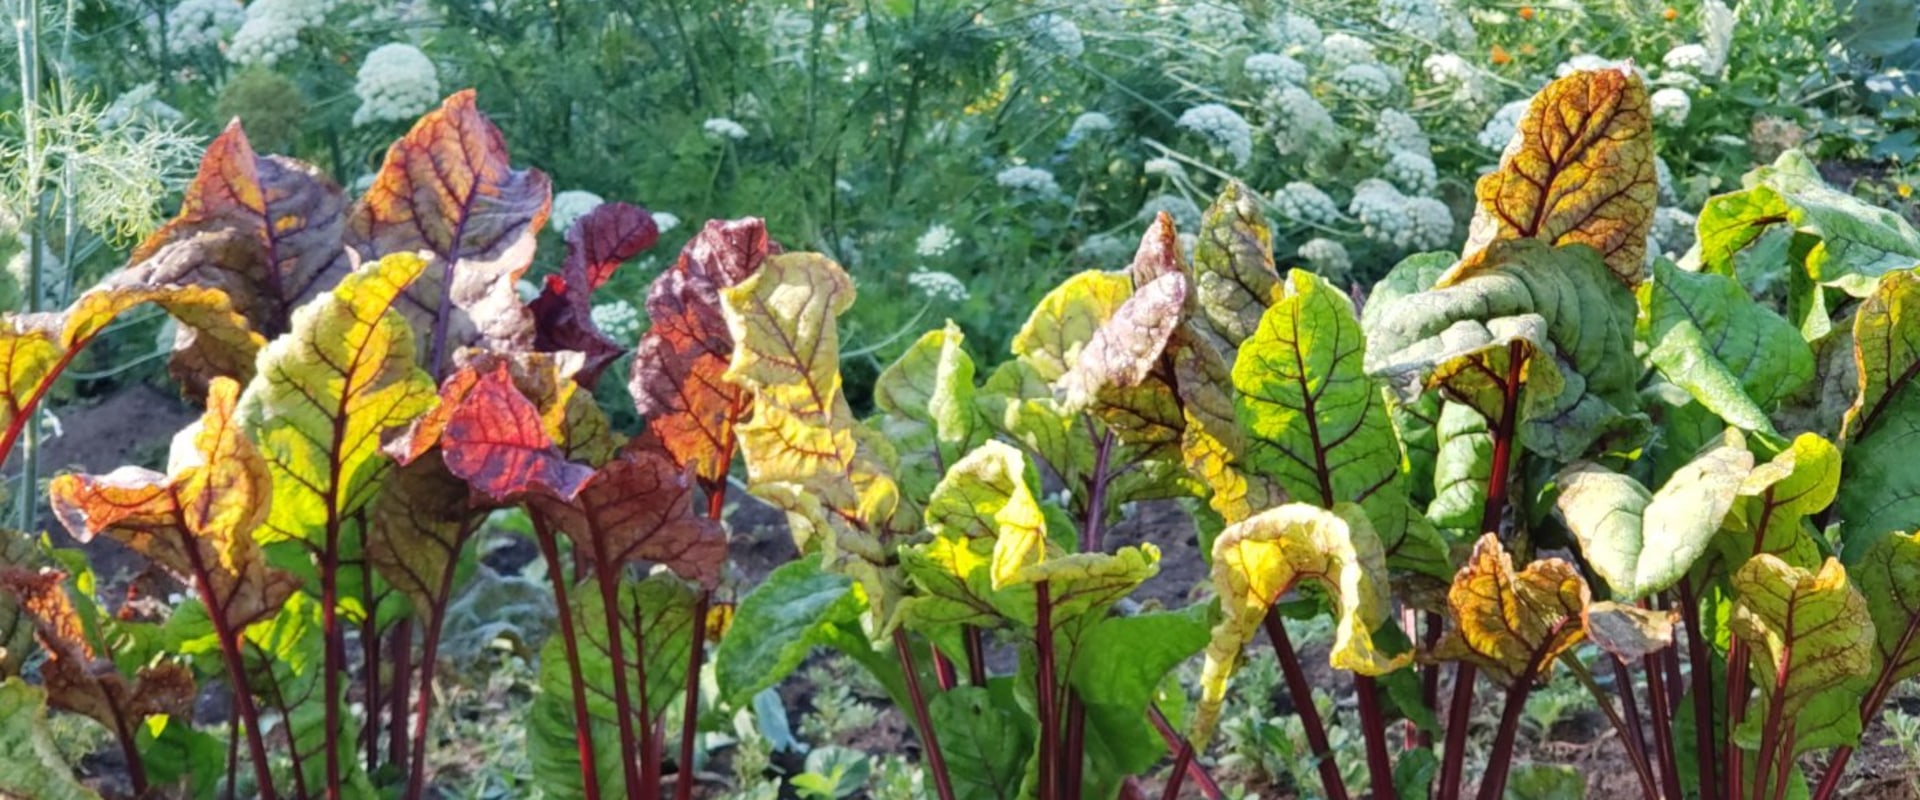 The Essential Guide to Choosing the Ideal Spot for Your Vegetable Garden